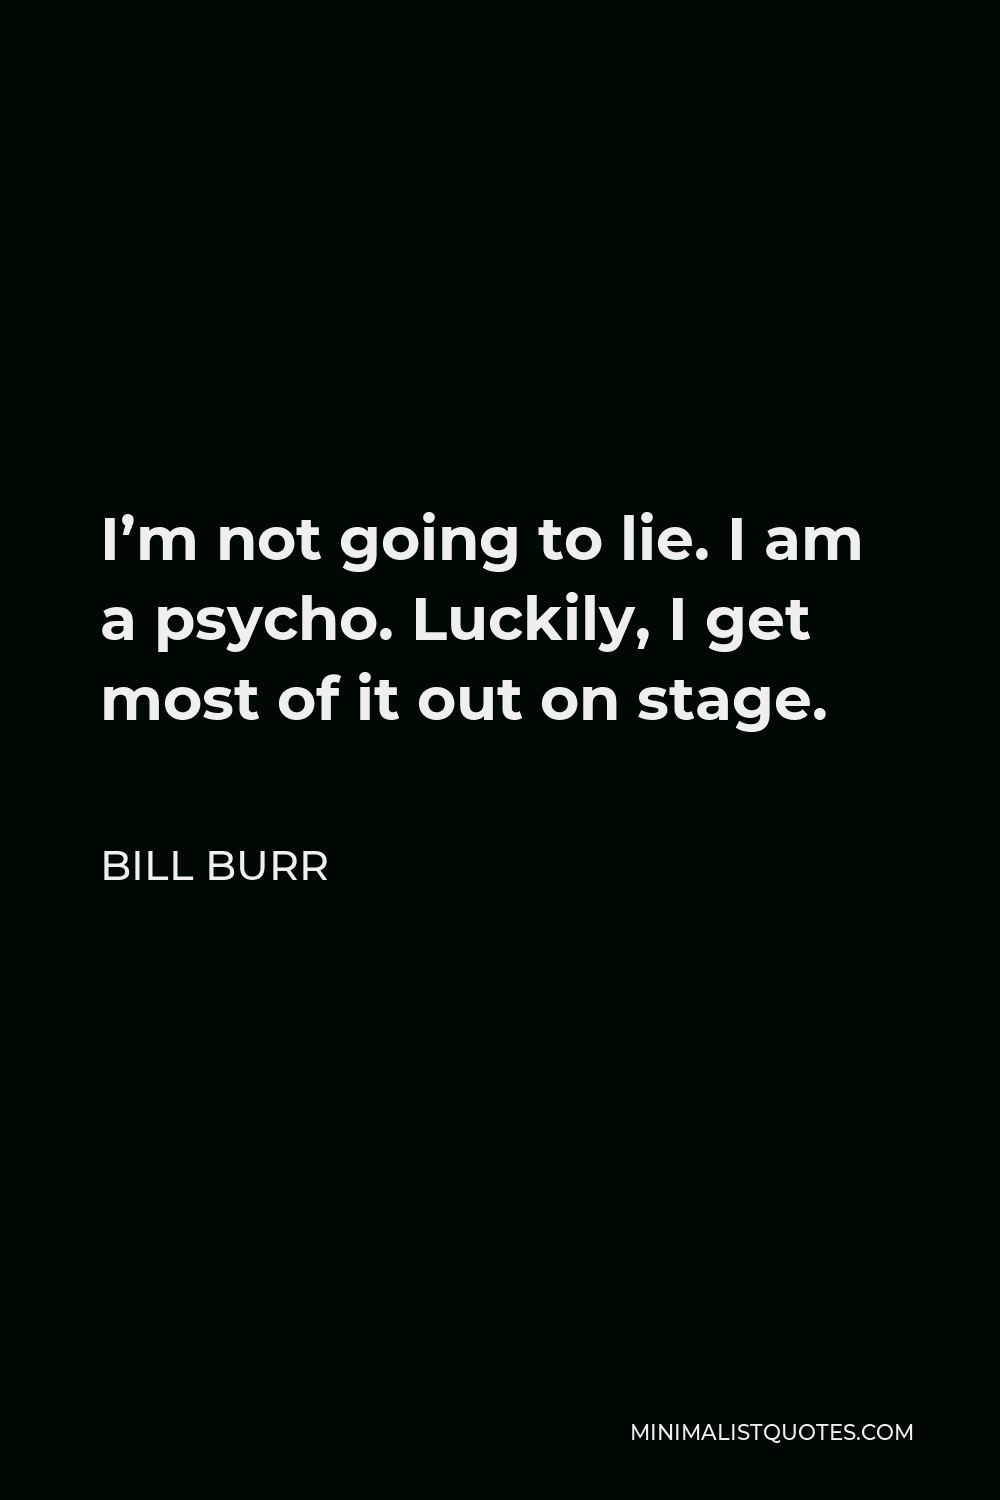 Bill Burr Quote - I’m not going to lie. I am a psycho. Luckily, I get most of it out on stage.